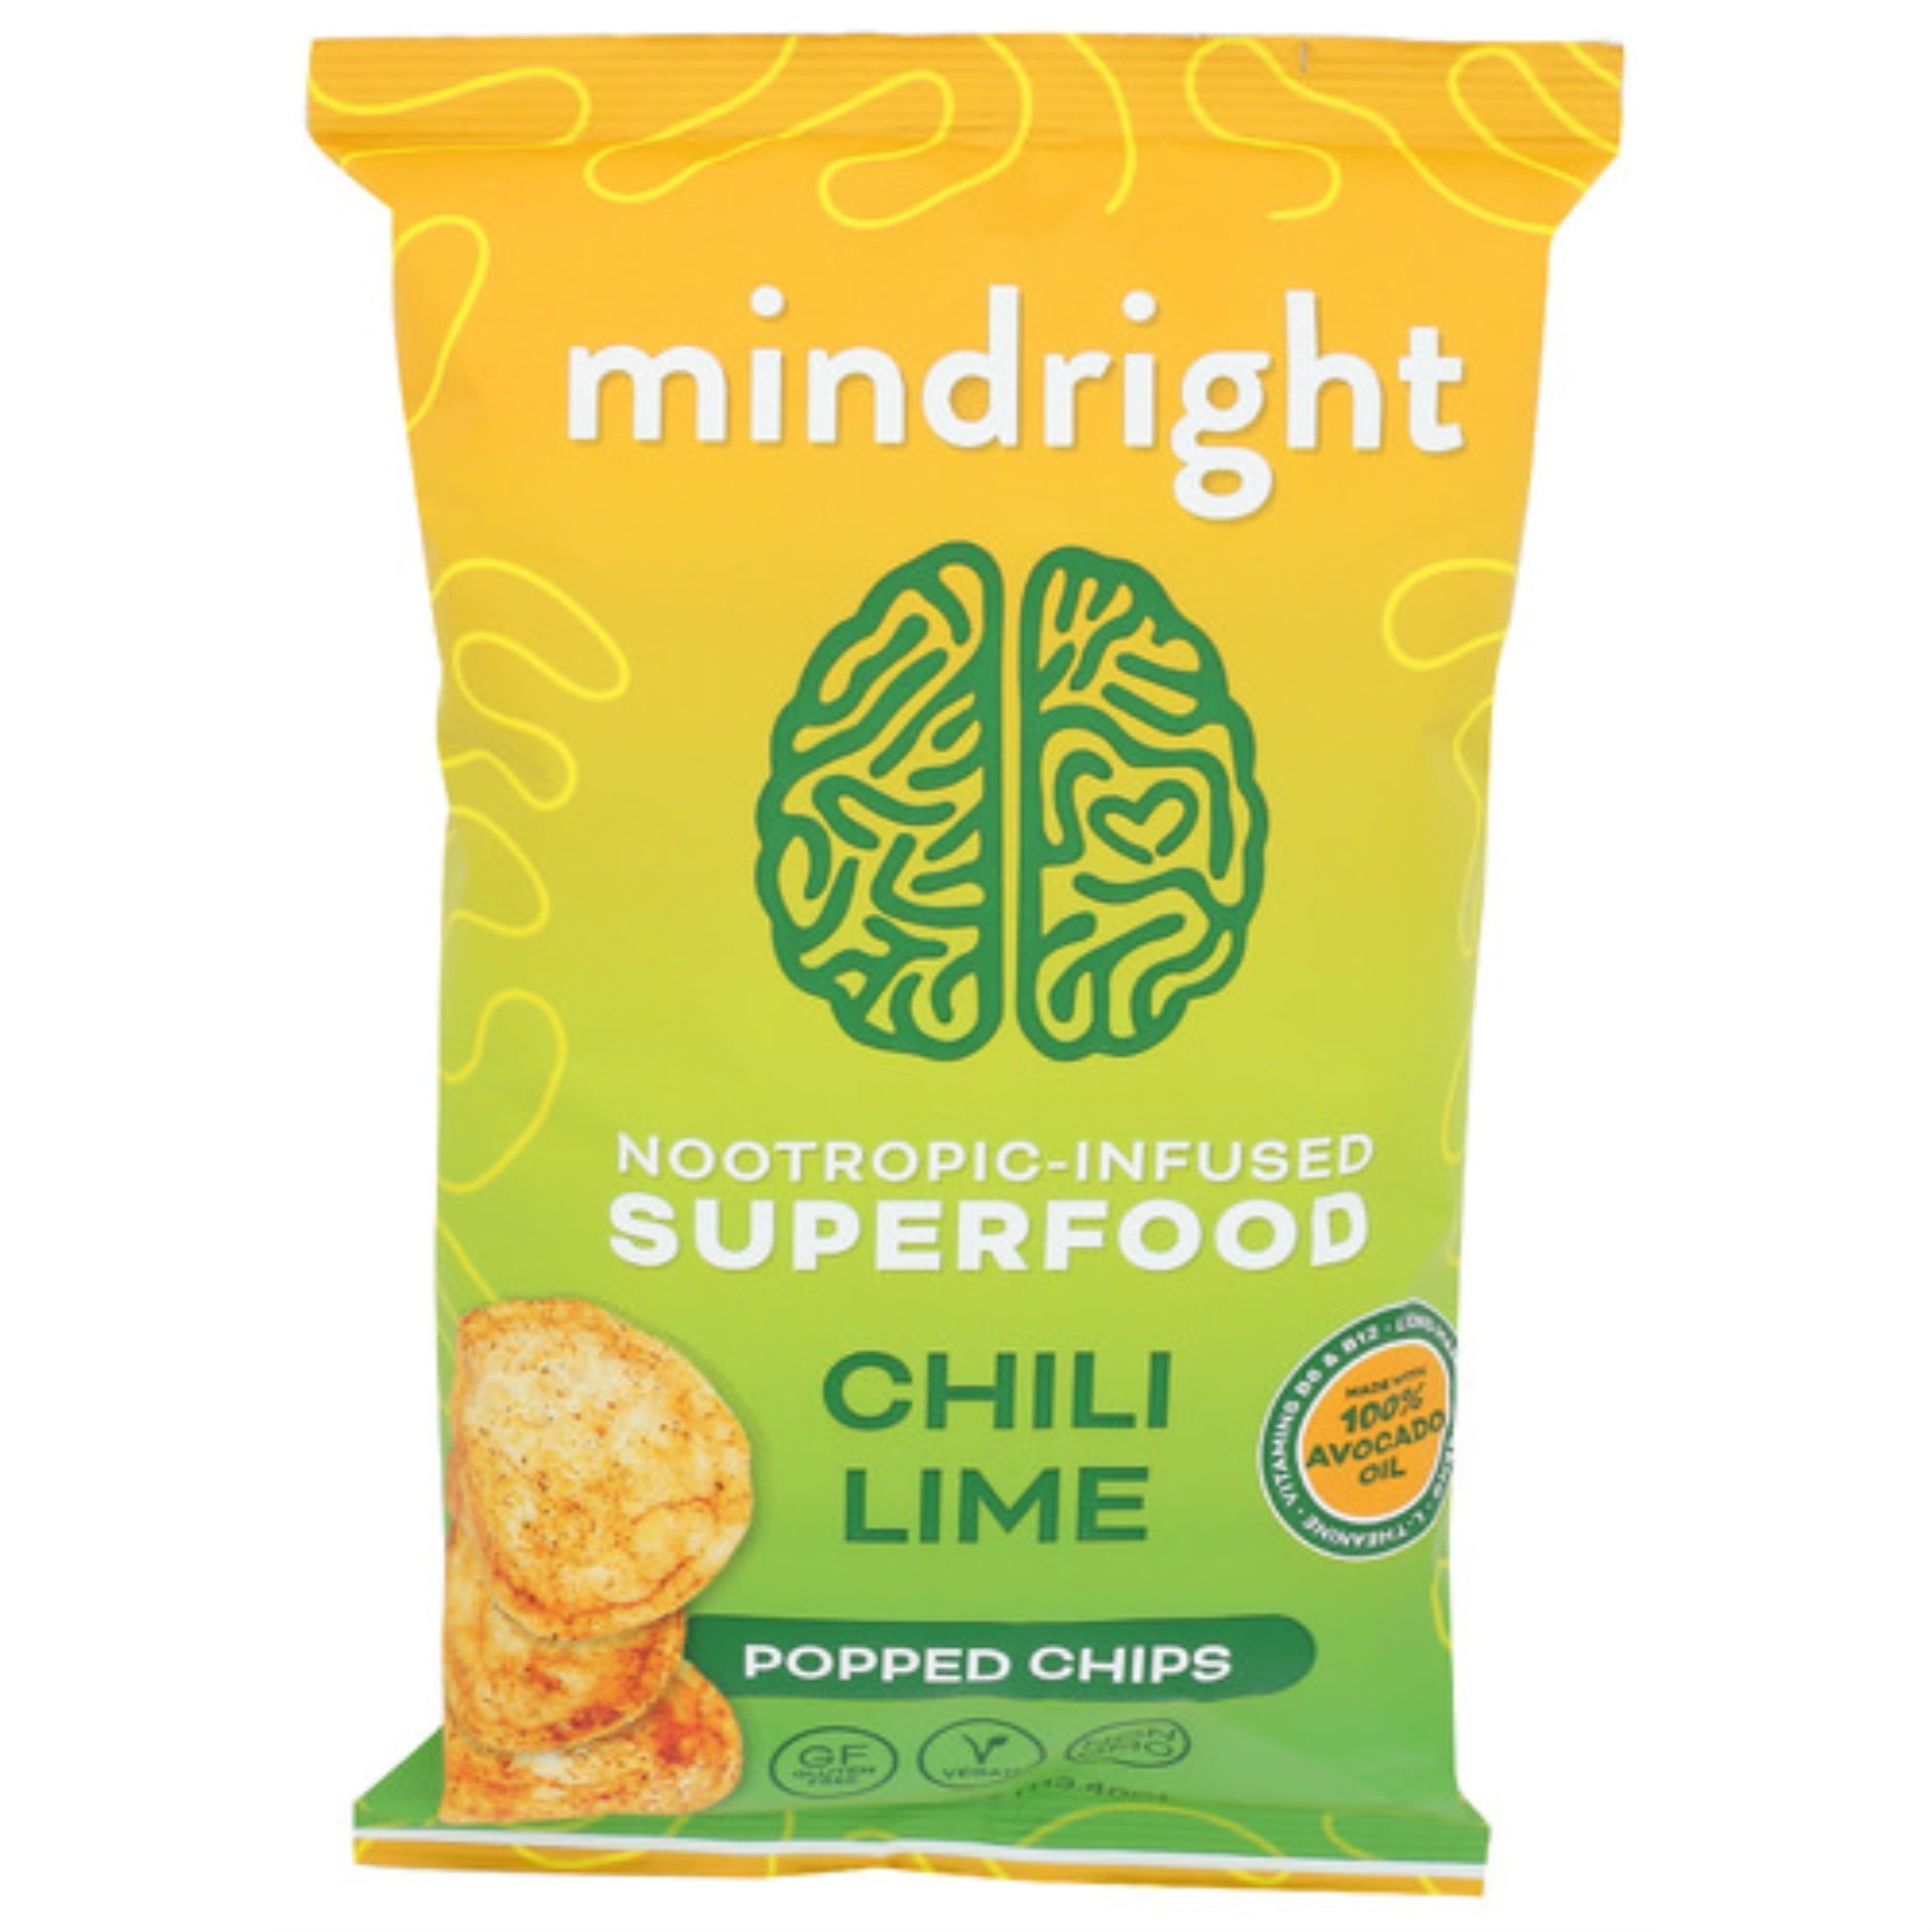 Mindright Chili Lime Popped Chips 4 oz